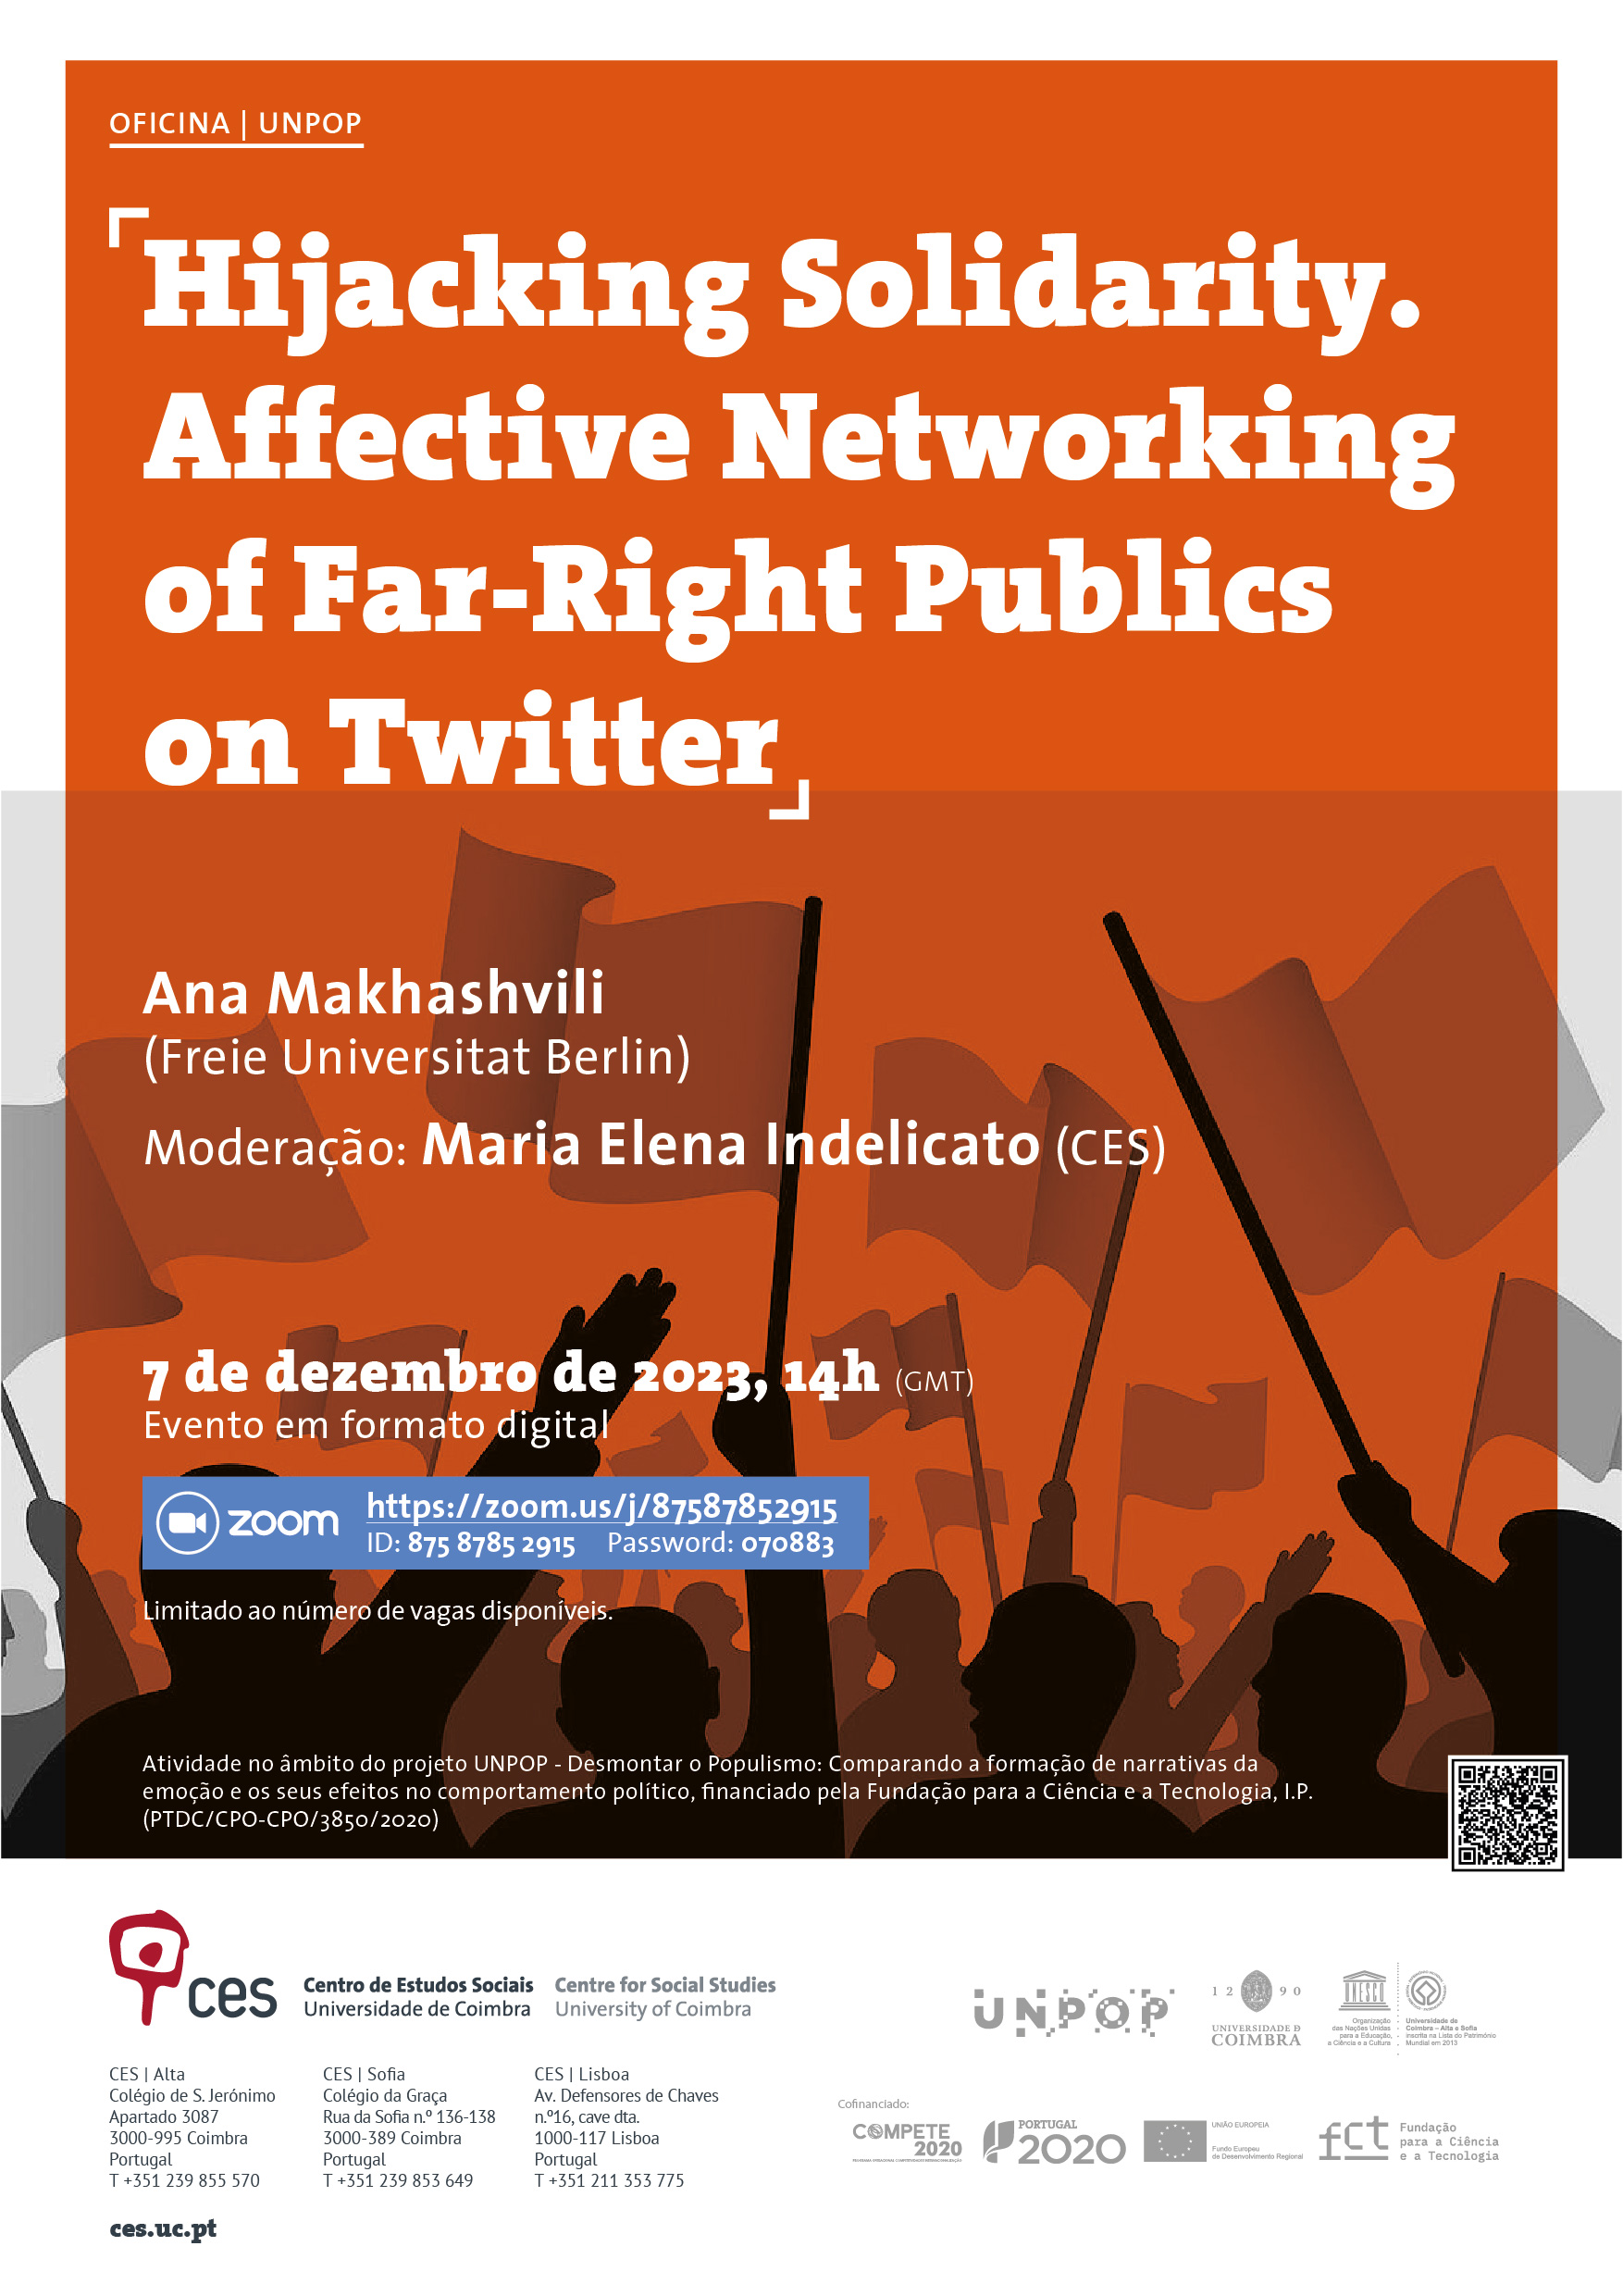 Hijacking Solidarity. Affective Networking of Far-Right Publics on Twitter<span id="edit_44260"><script>$(function() { $('#edit_44260').load( "/myces/user/editobj.php?tipo=evento&id=44260" ); });</script></span>